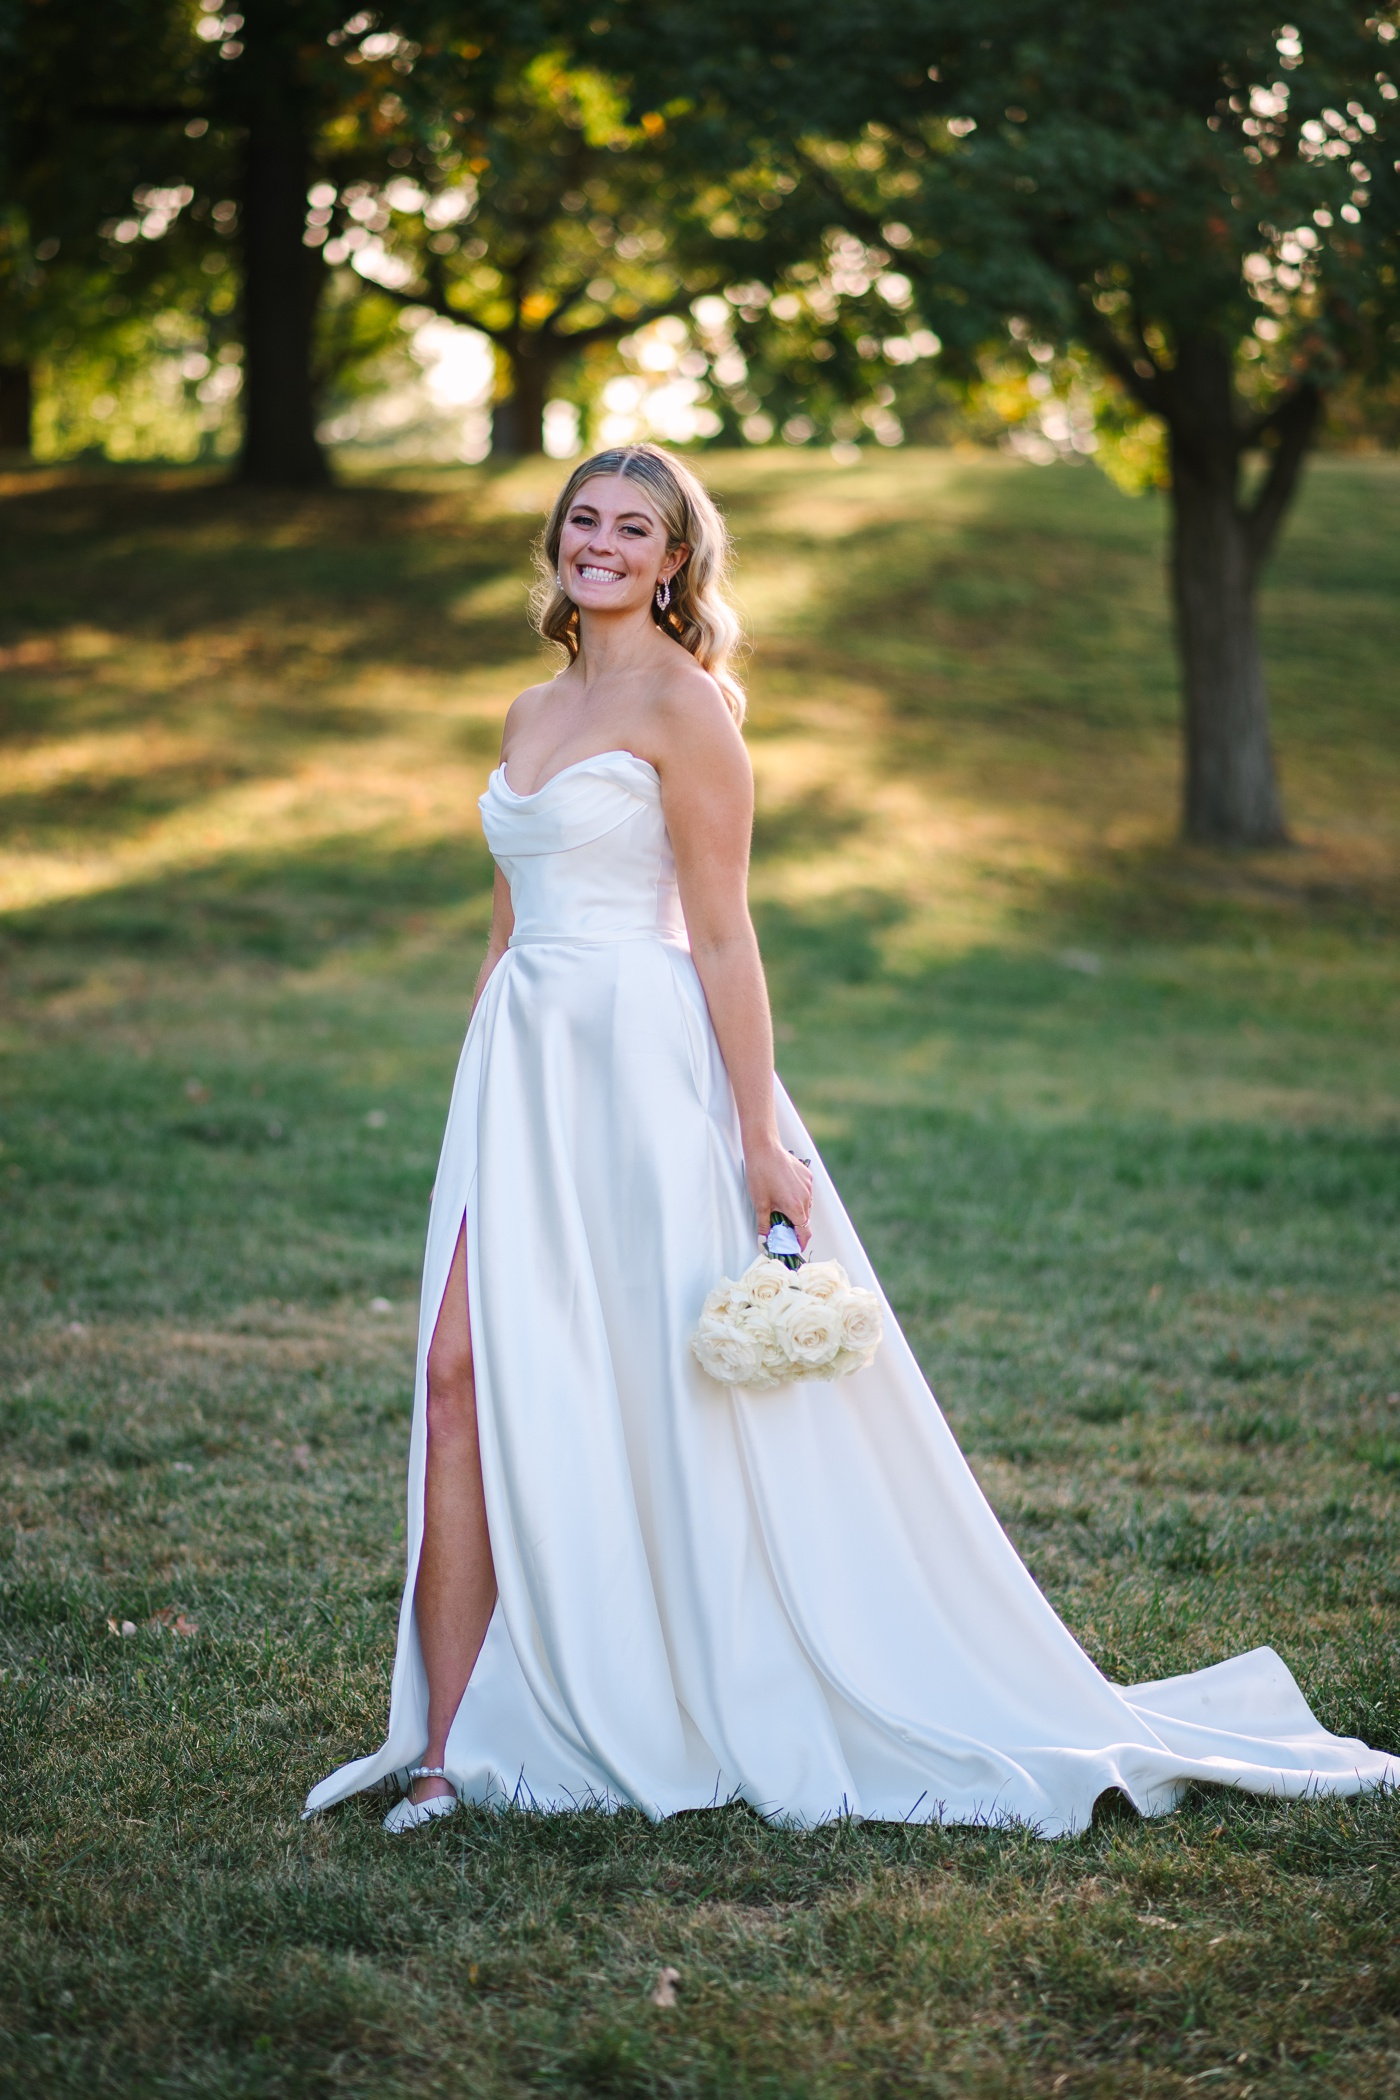 Bridal portraits at Garfield Park in Indianapolis, IN